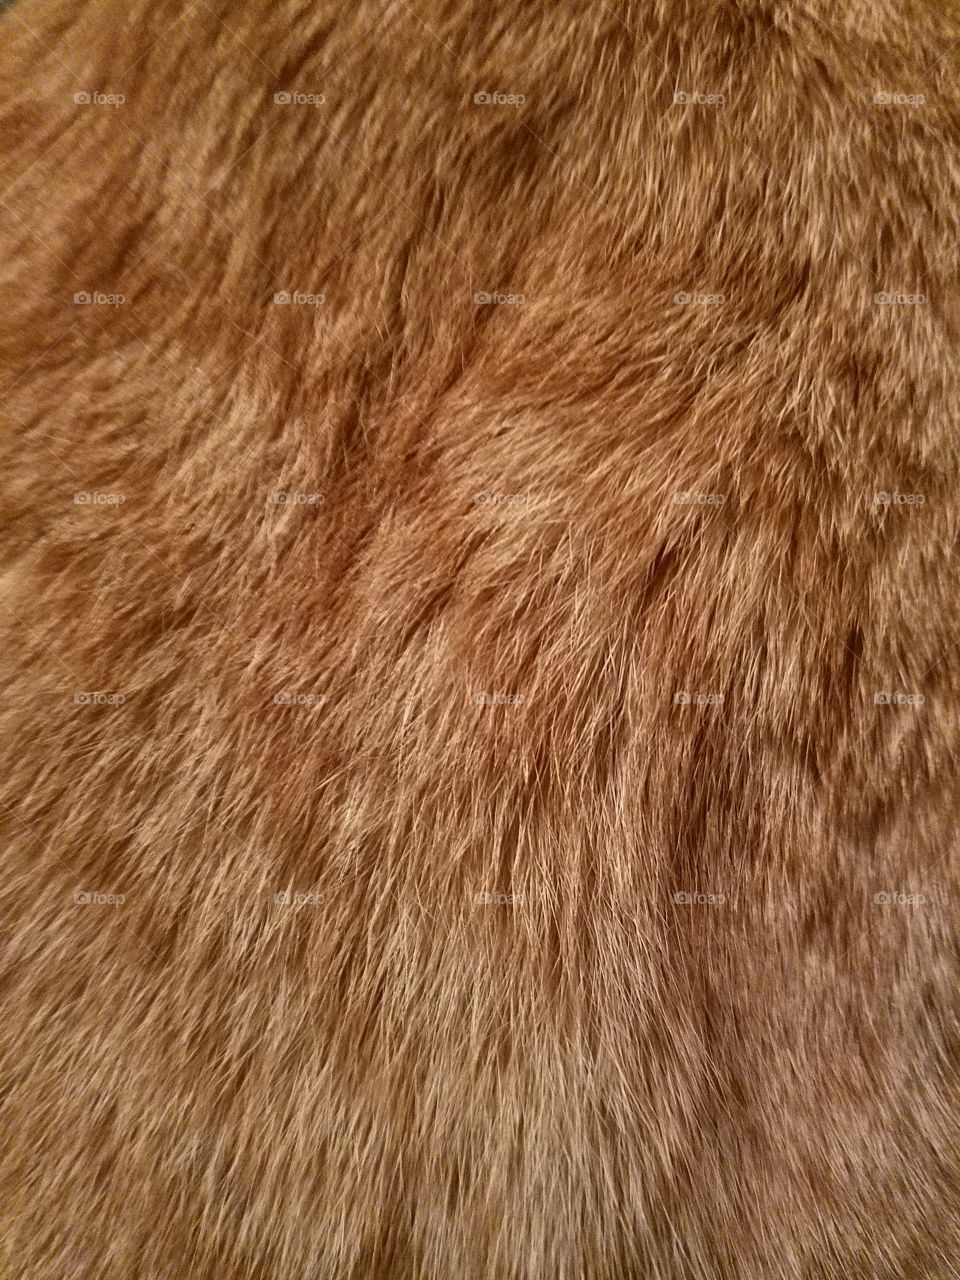 My cats fur, so intense up close and personal. His name is Cheetoh.